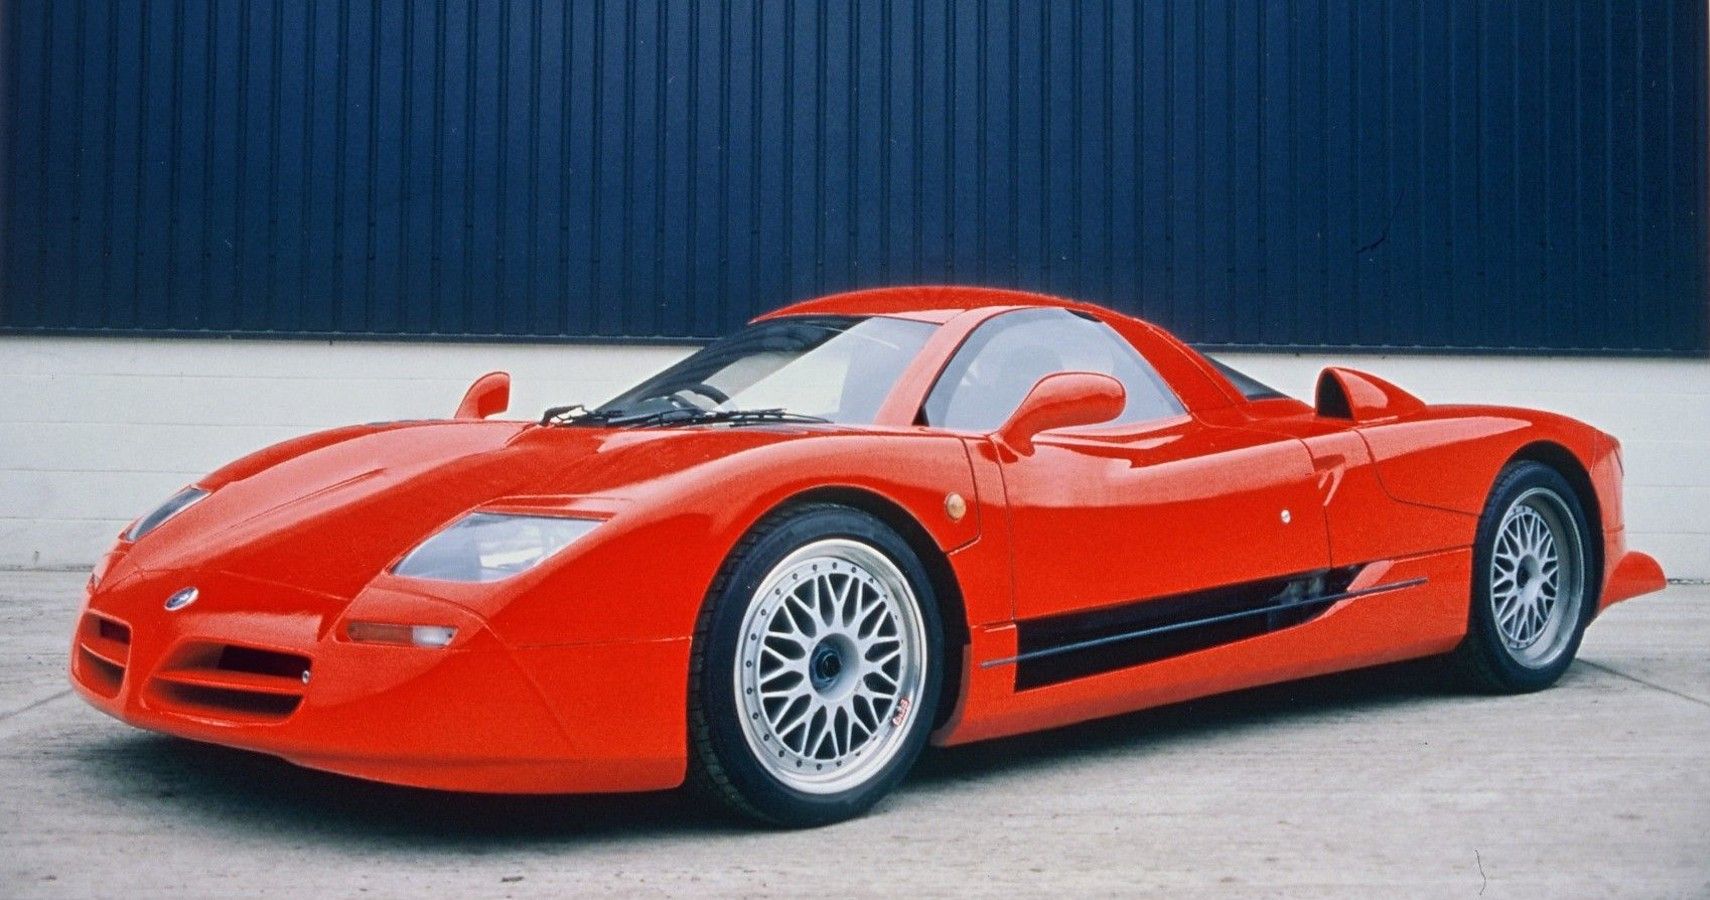 Nissan R390 GT1 was originally painted in red 